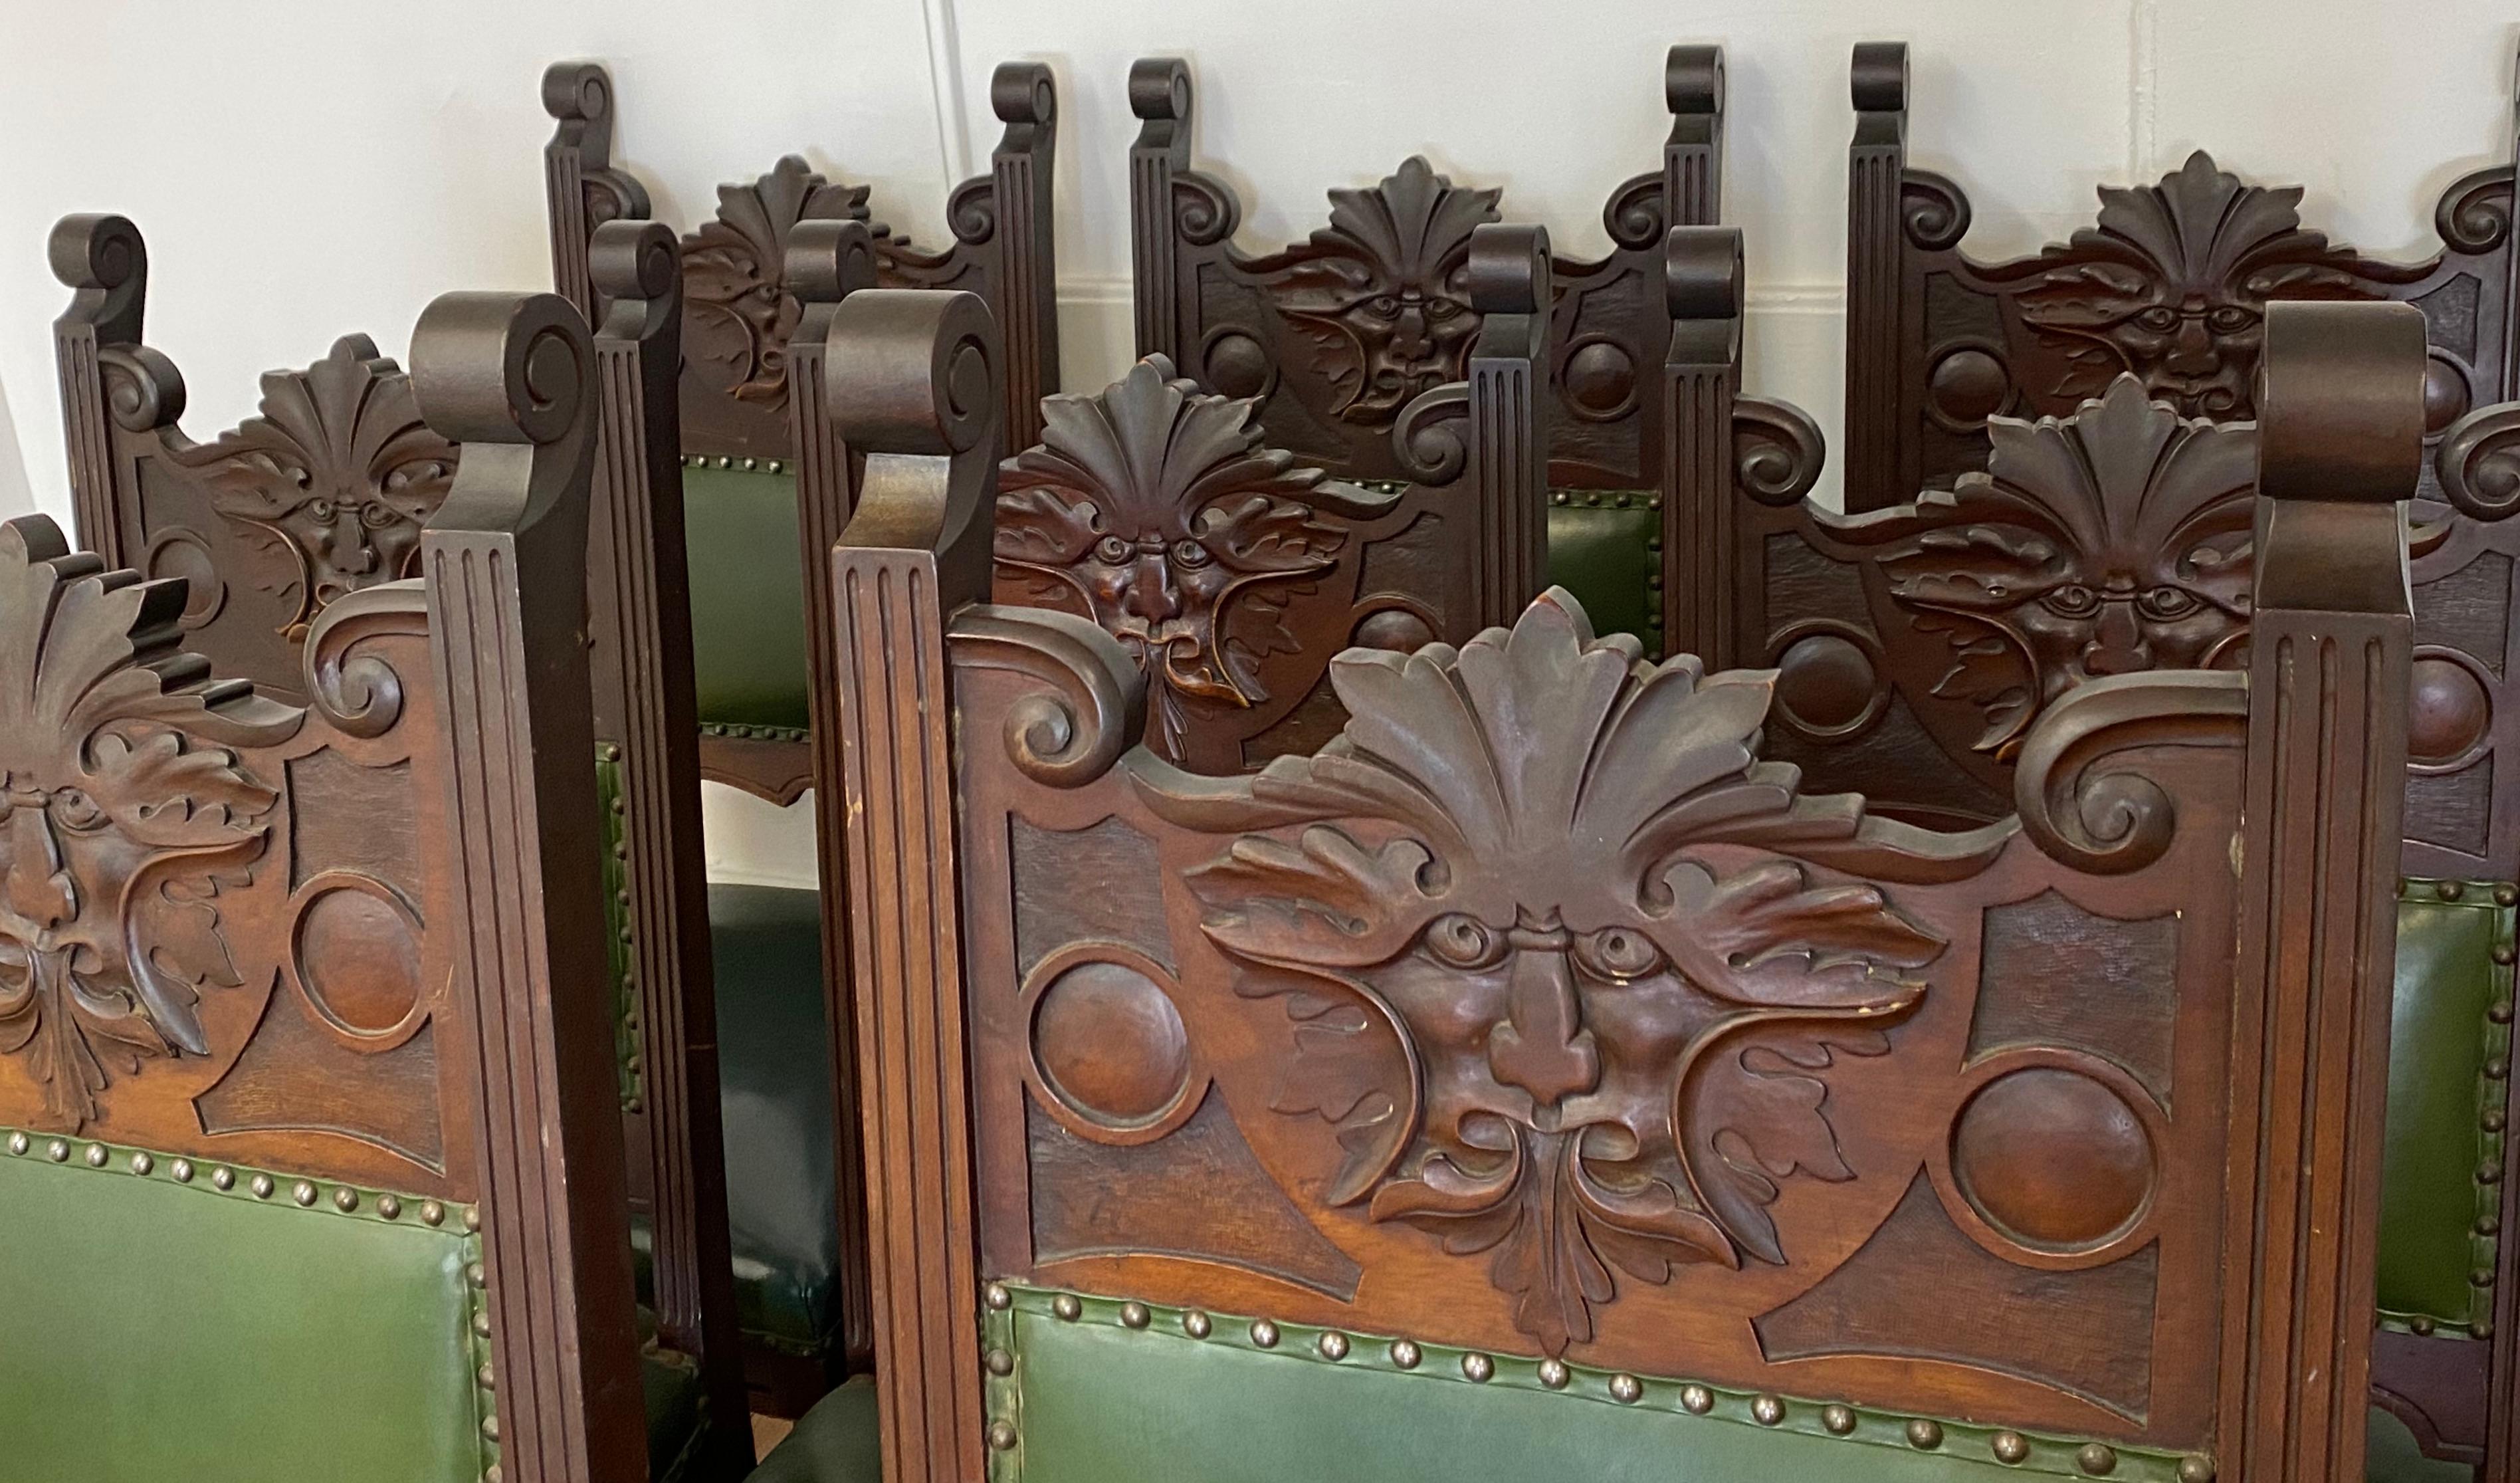 Eight Gothic style carved mahogany dining chairs 19th c.

Handsomely hand carved Gothic style dining chairs

The set includes two arm chairs and six side chairs

Each chair is covered in faux leather with brass tacks

Measures: 26